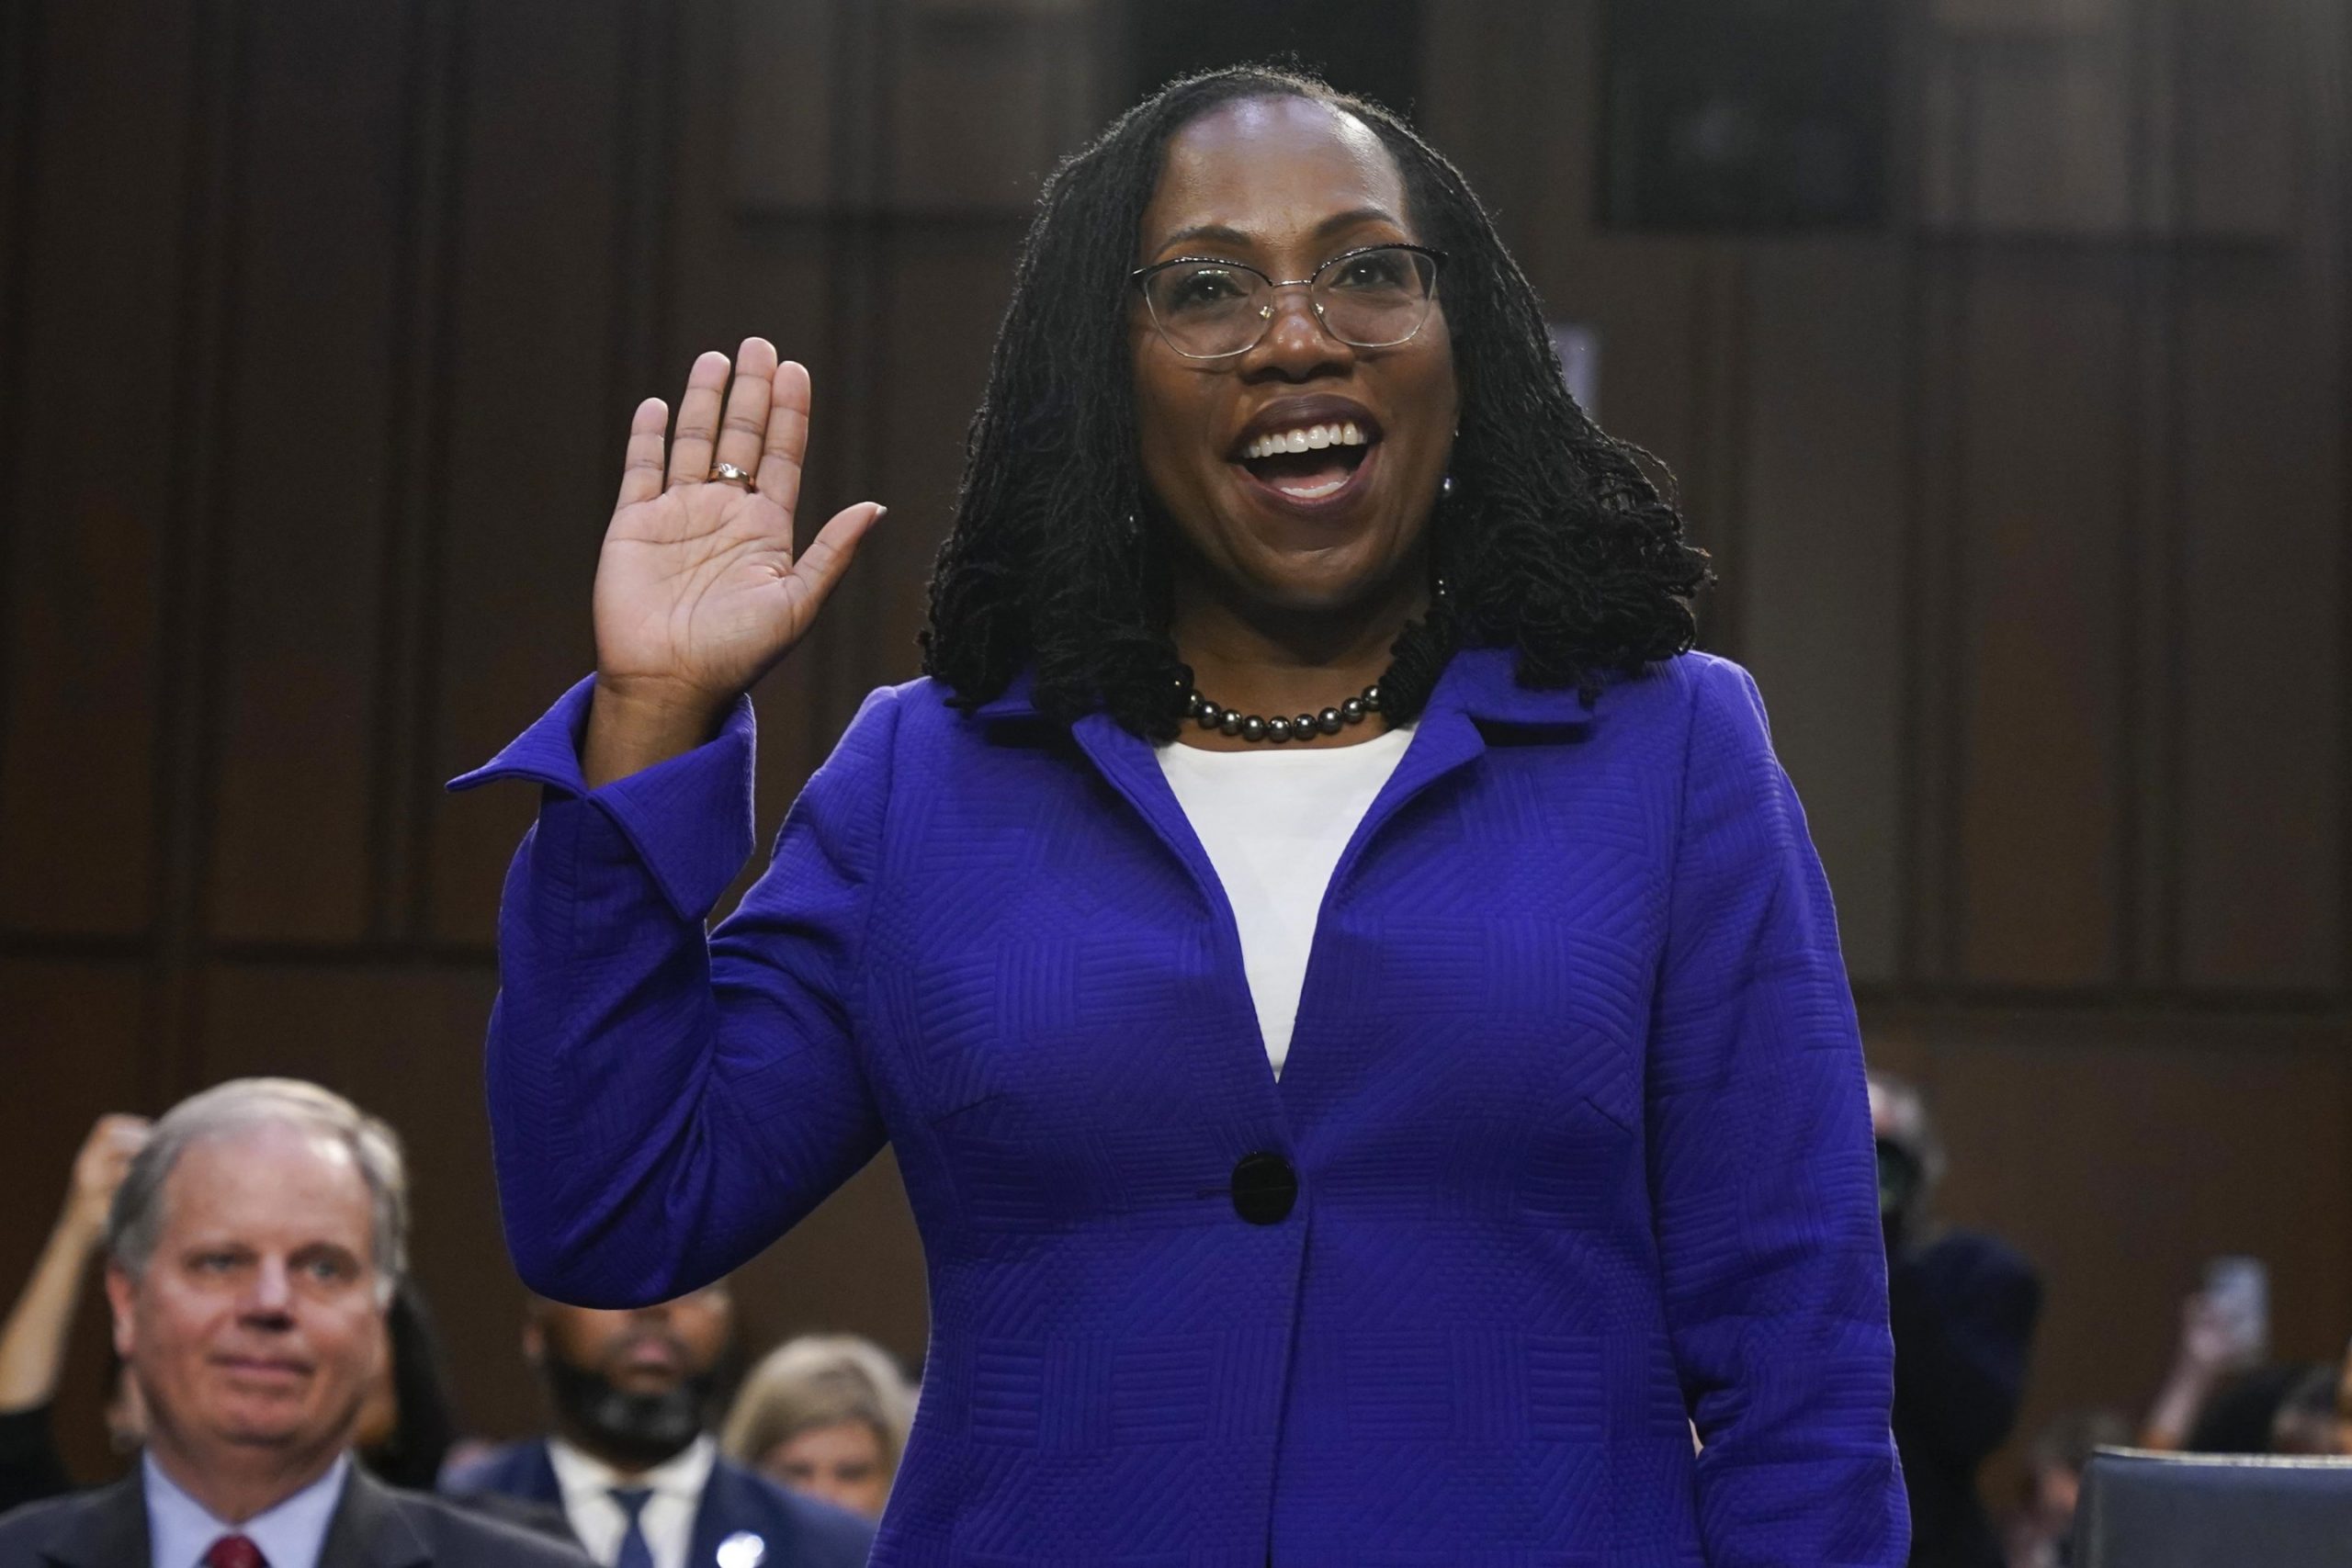 Ketanji Brown Jackson confirmed as first Black woman Supreme Court justice